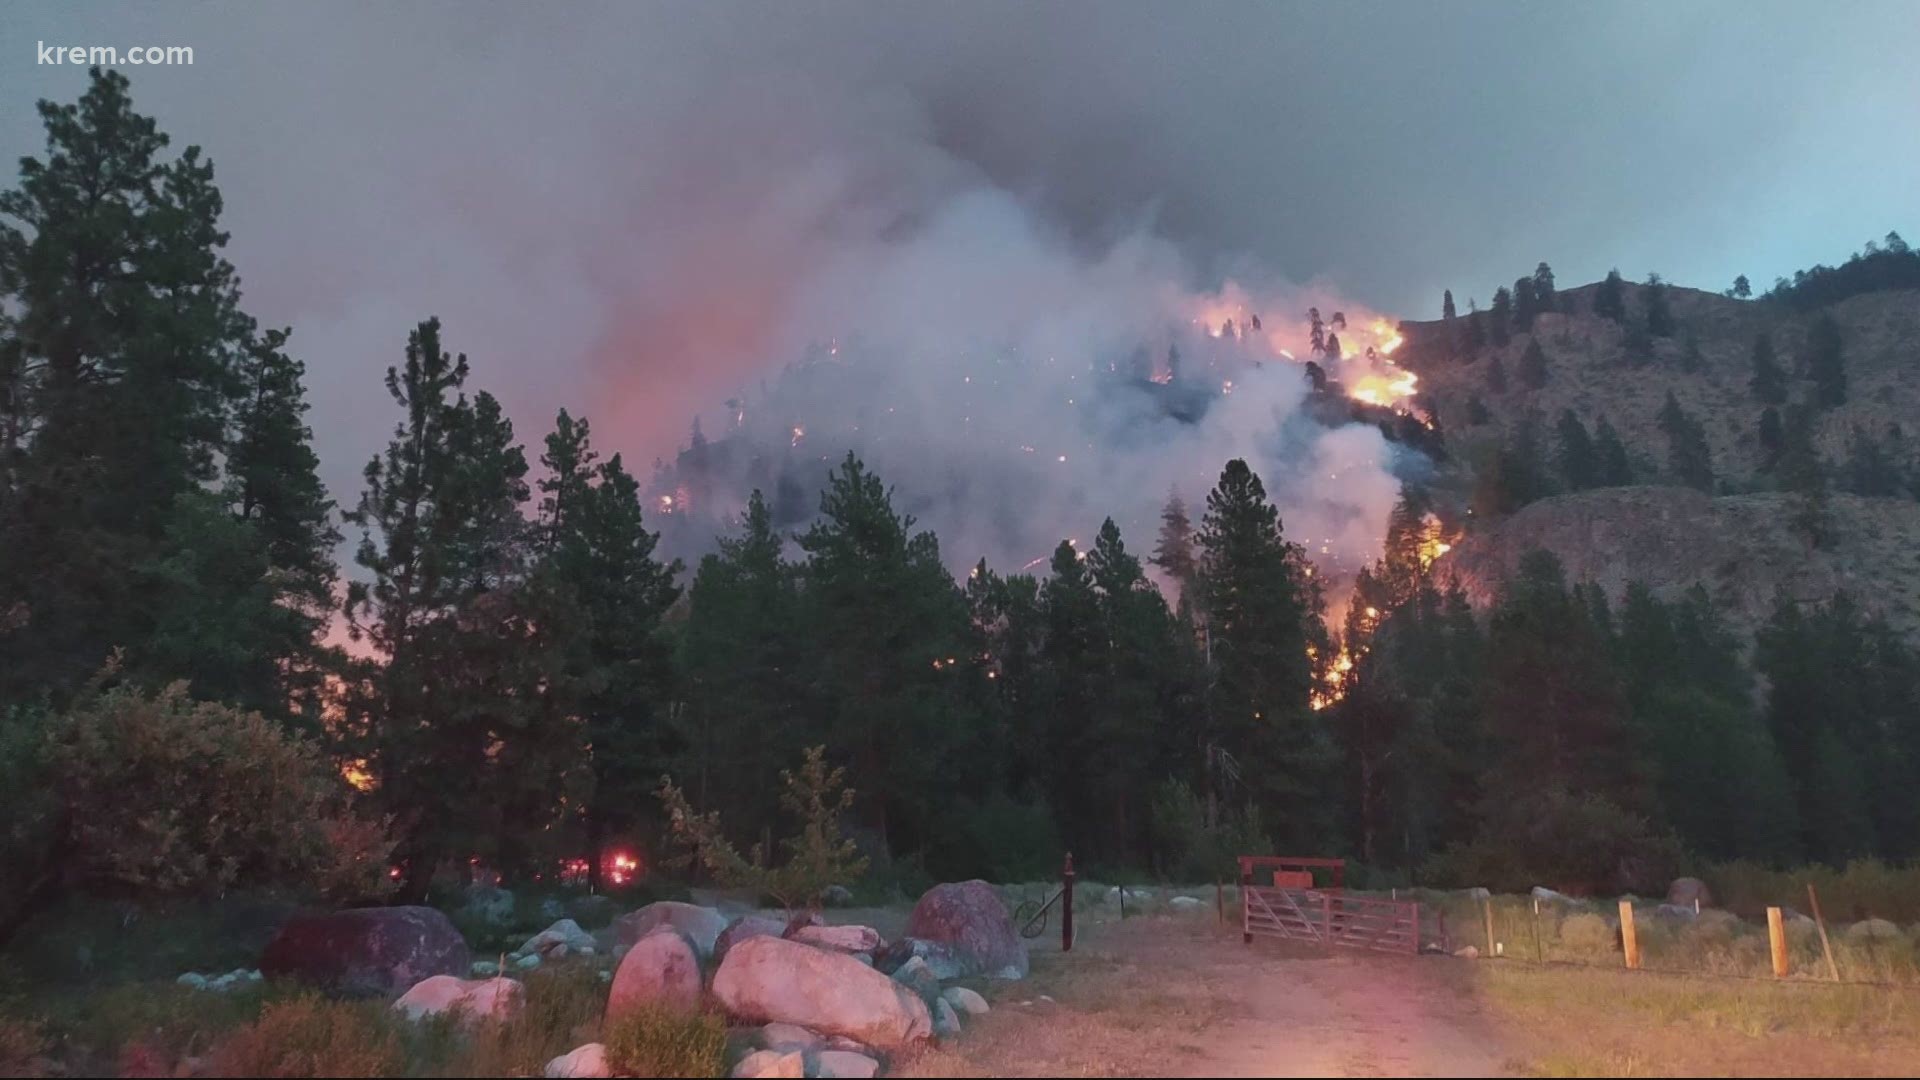 According to the Northwest Interagency Coordination Center, Washington state had six large wildfires on July 19, 2020. But as of July 19, 2021, it's reporting 17.